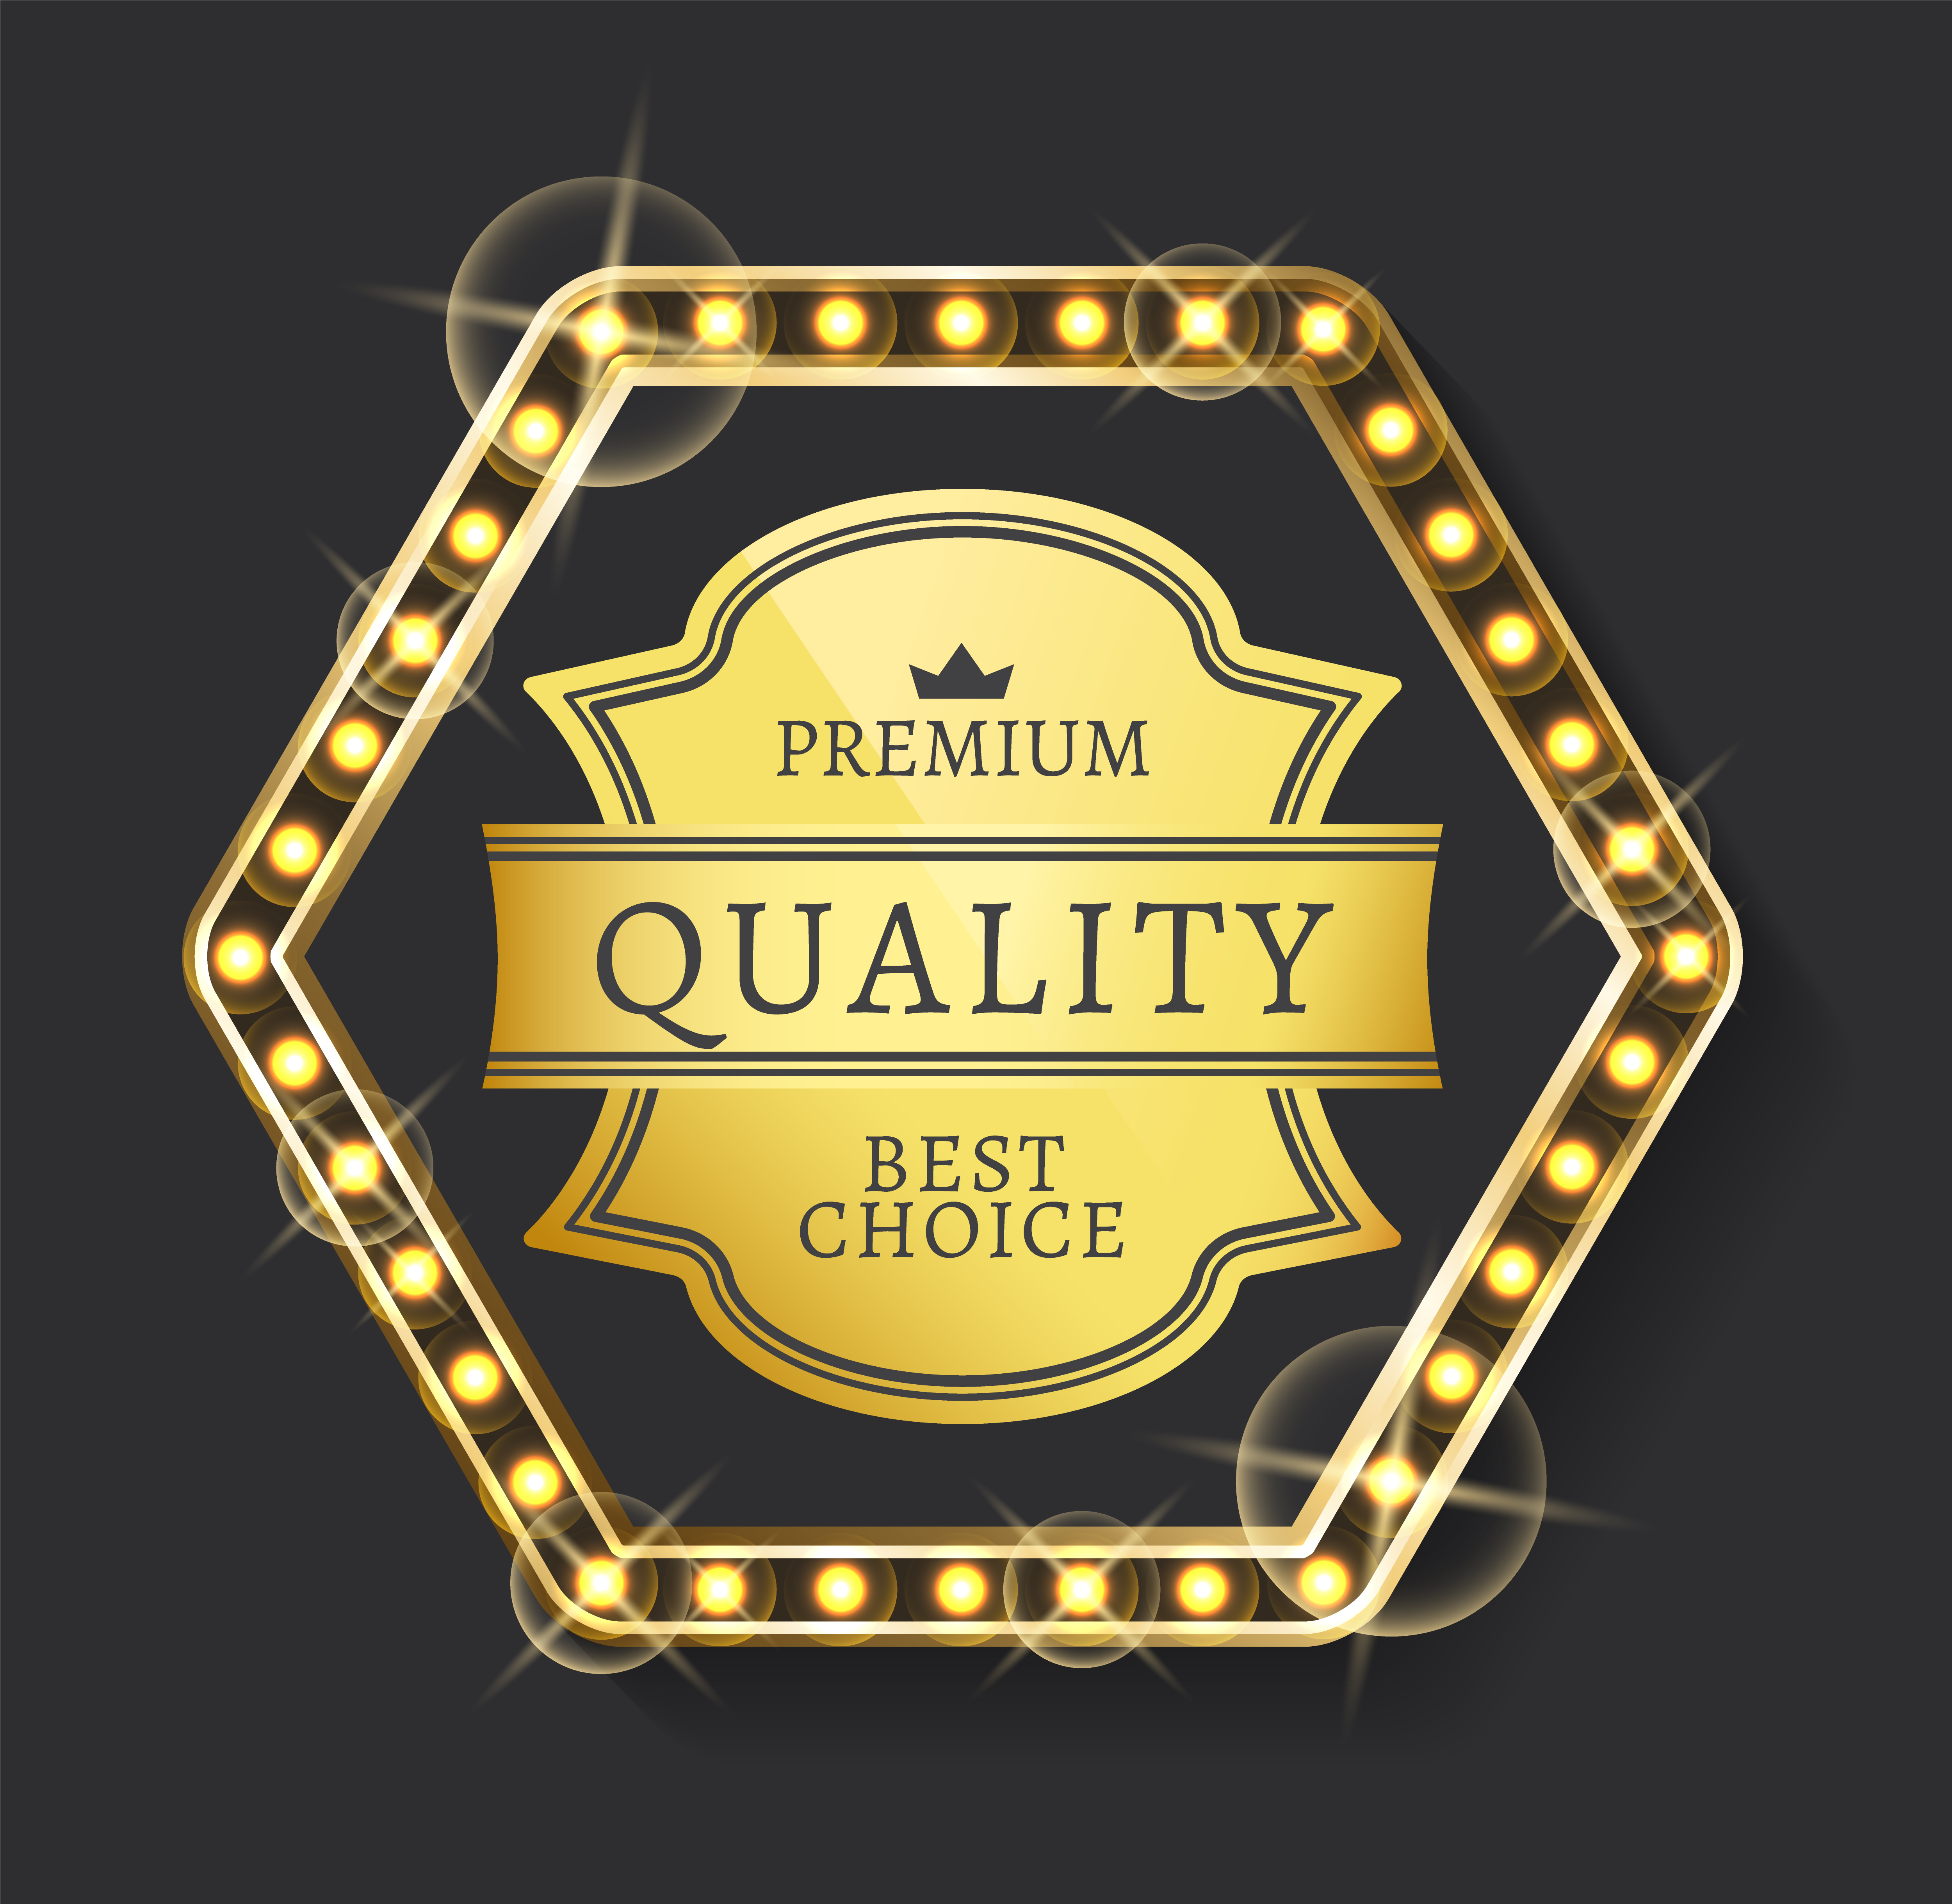 Premium quality and best choice label decorated by light bulbs, golden badge of guarantee. Glowing medal or label decorated by crown, shiny icon vector. Label of Best Shopping Product, Premium Vector